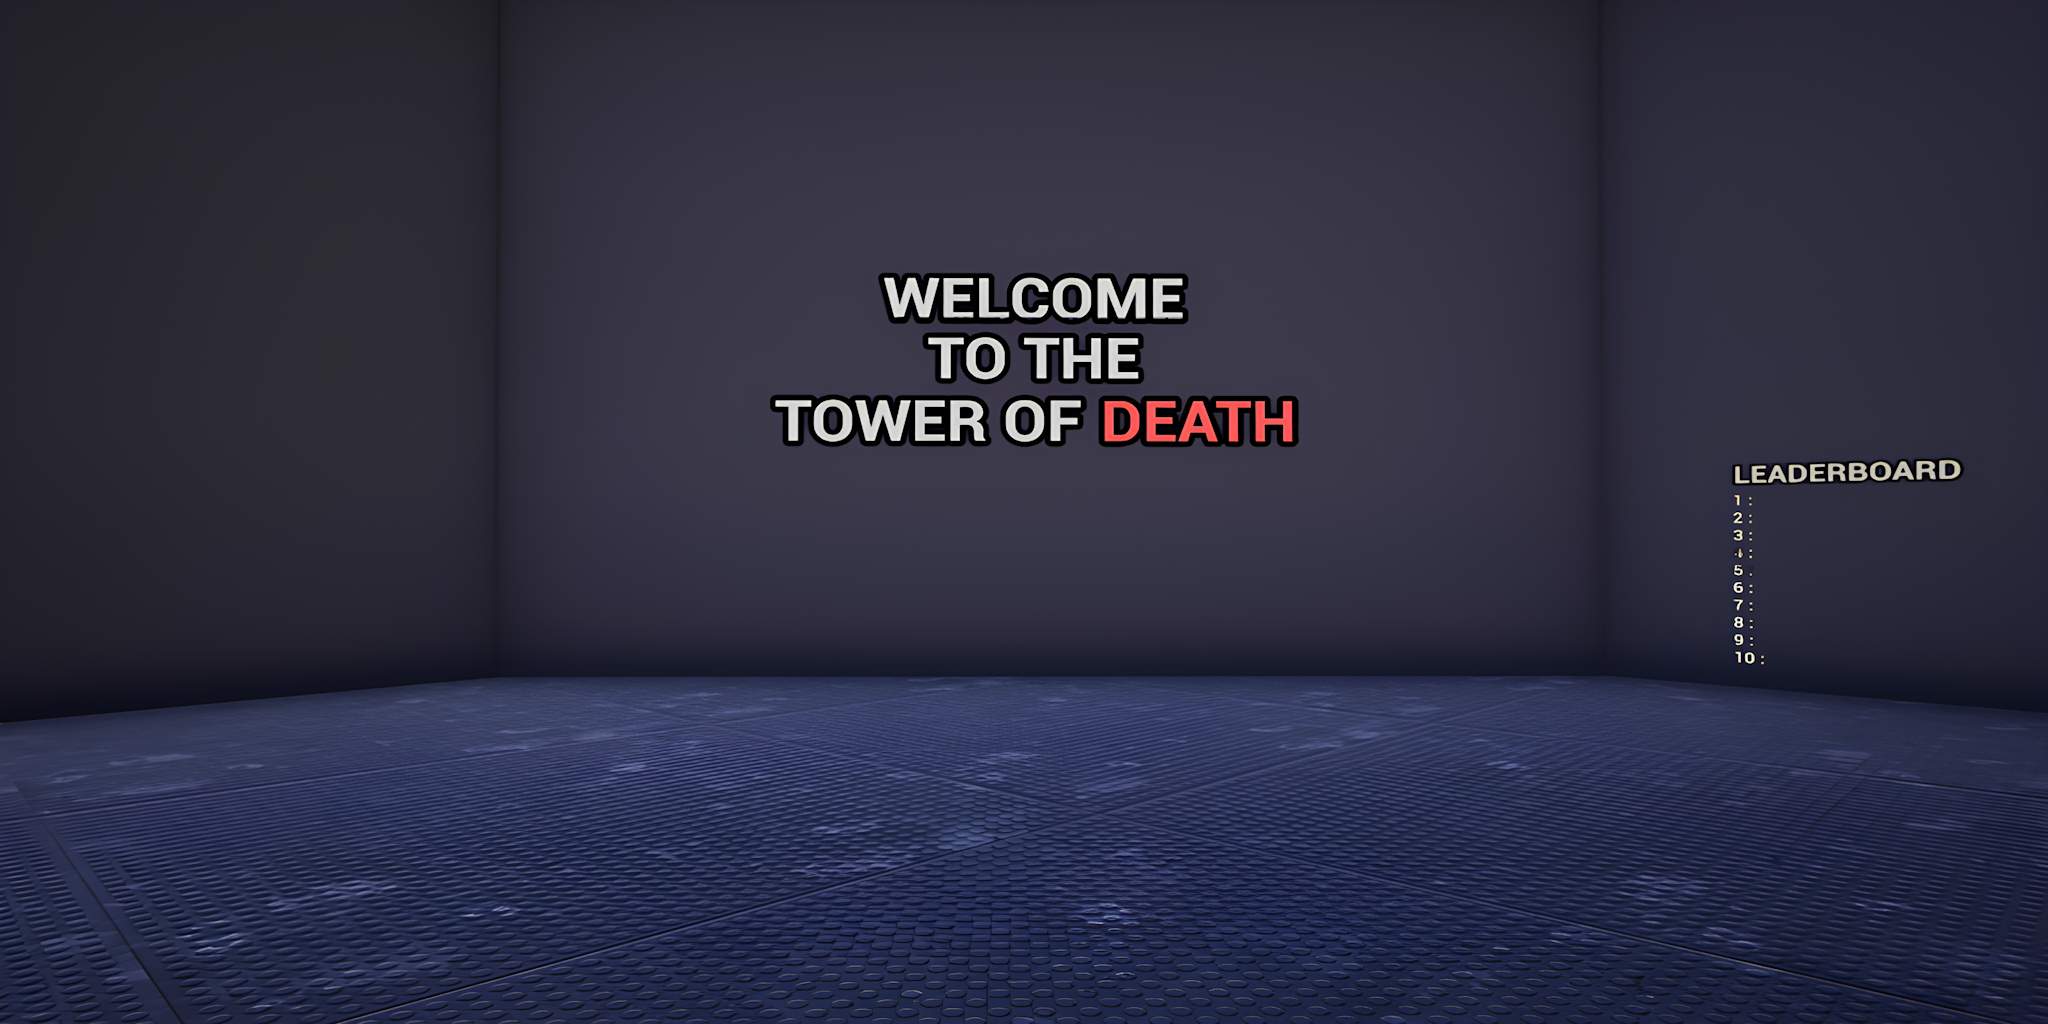 TOWER OF DEATH